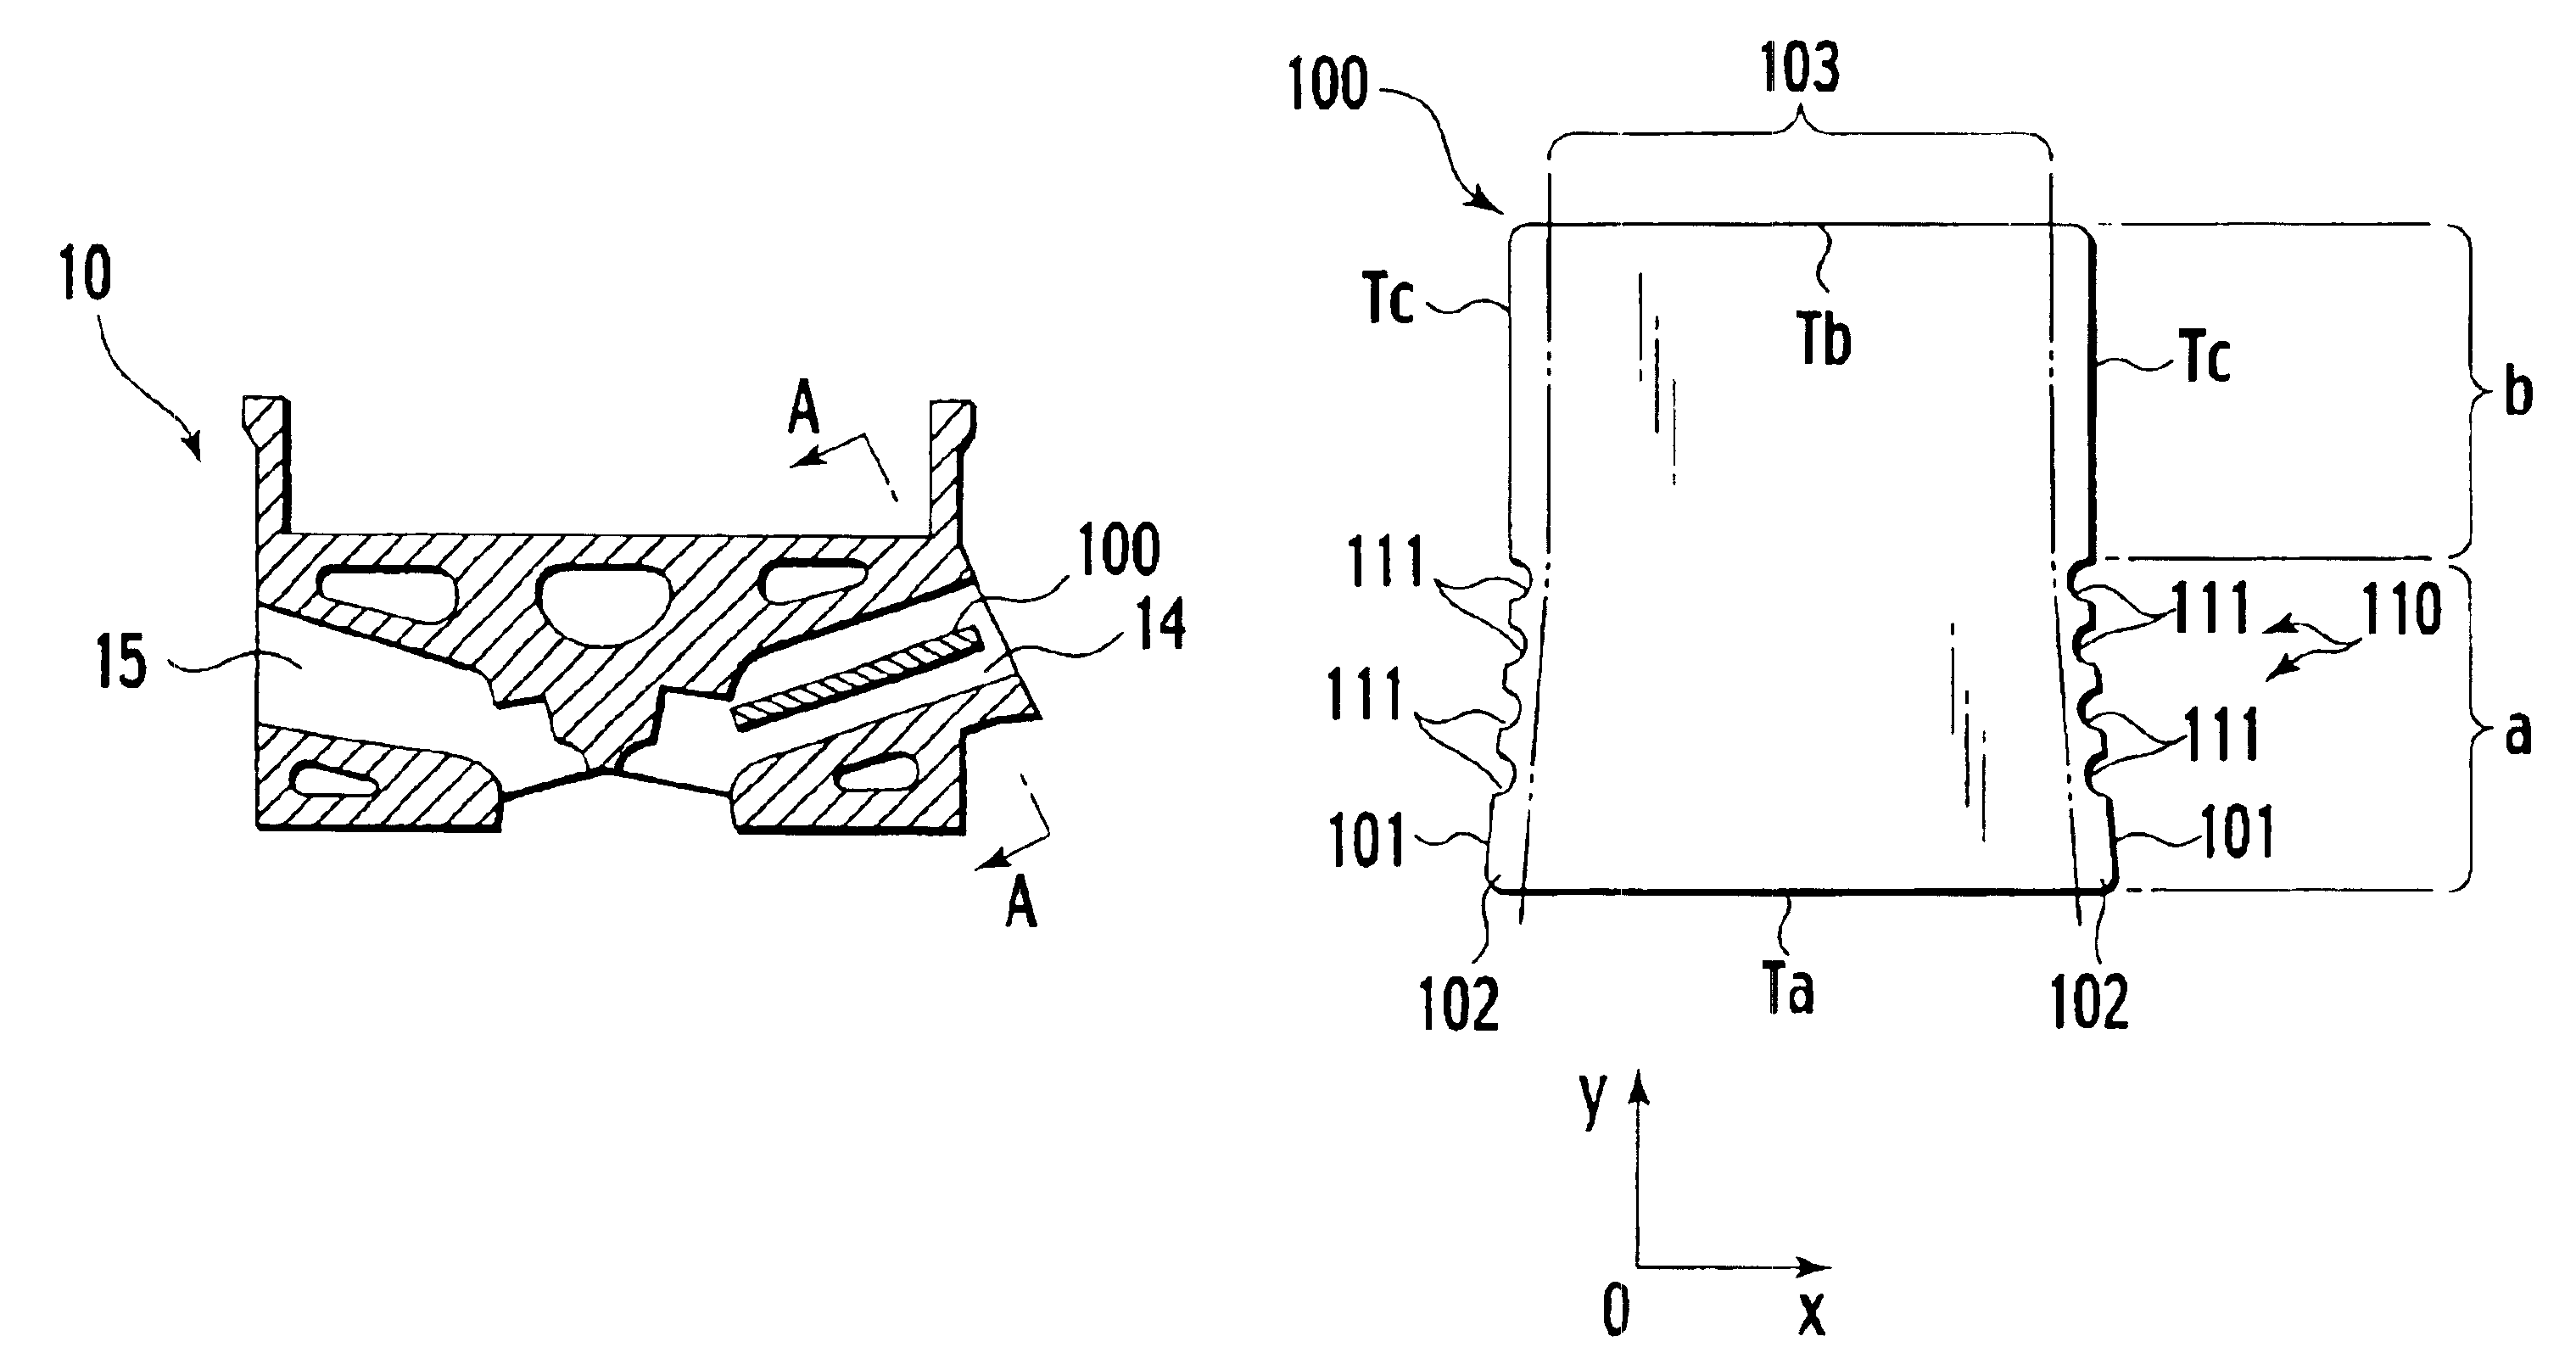 Partition plate for intake port, sand core for forming intake port, and cylinder head